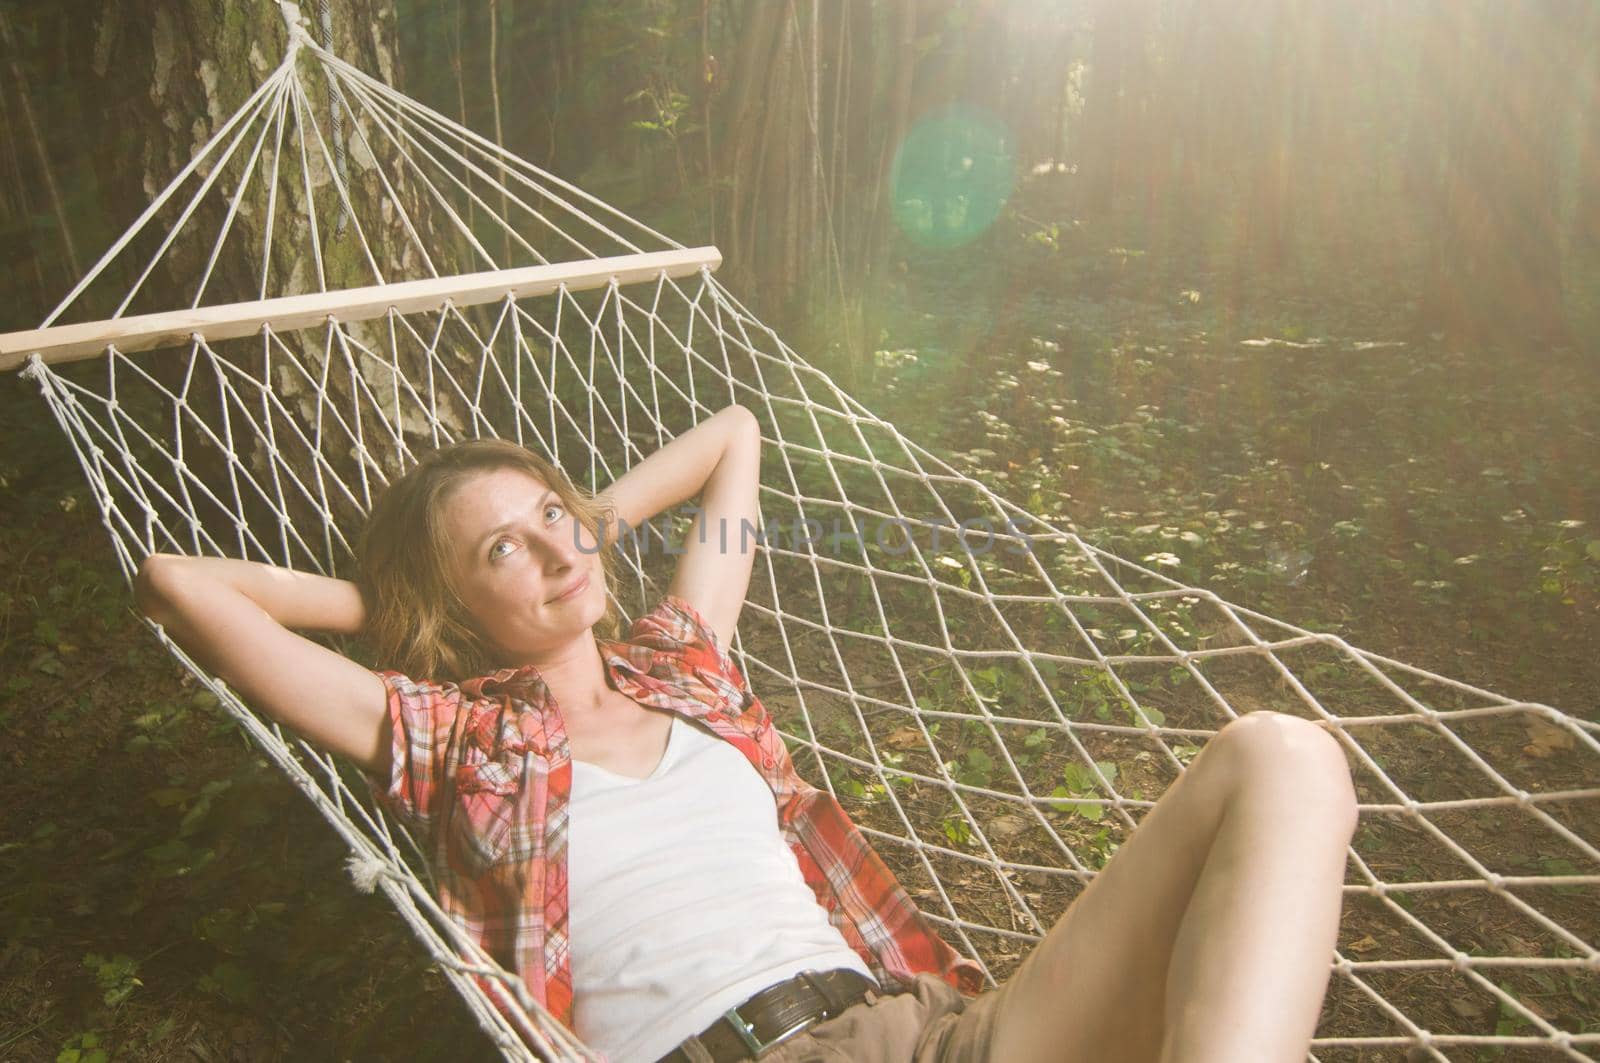 Beautiful woman relaxing in hammock out in the woods